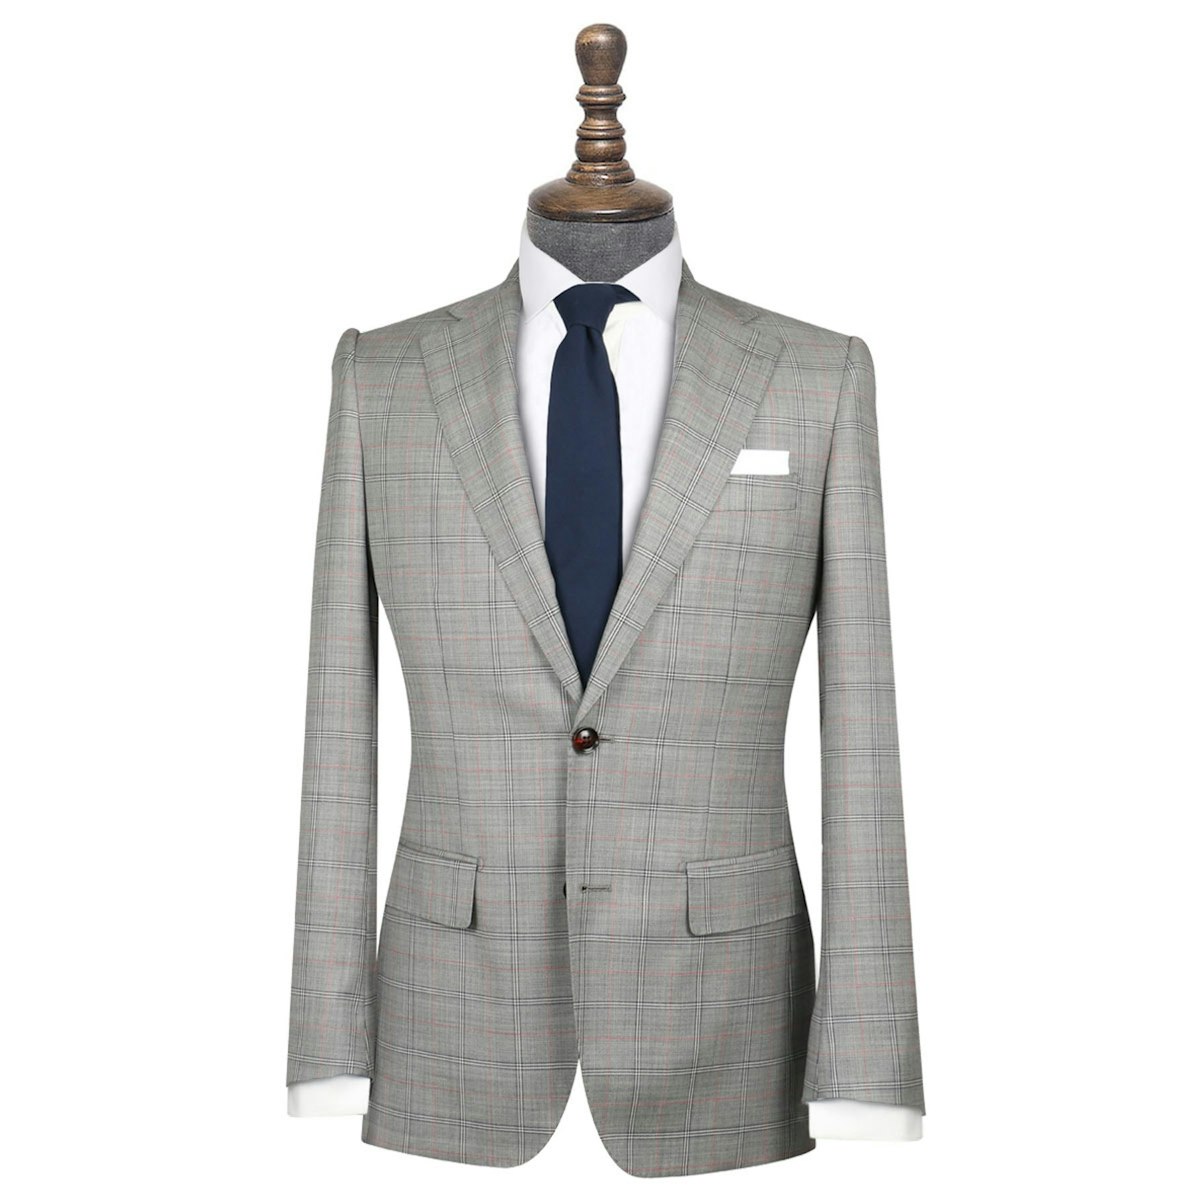 InStitchu Collection The Vanni Grey and Red Windowpane Wool Jacket 